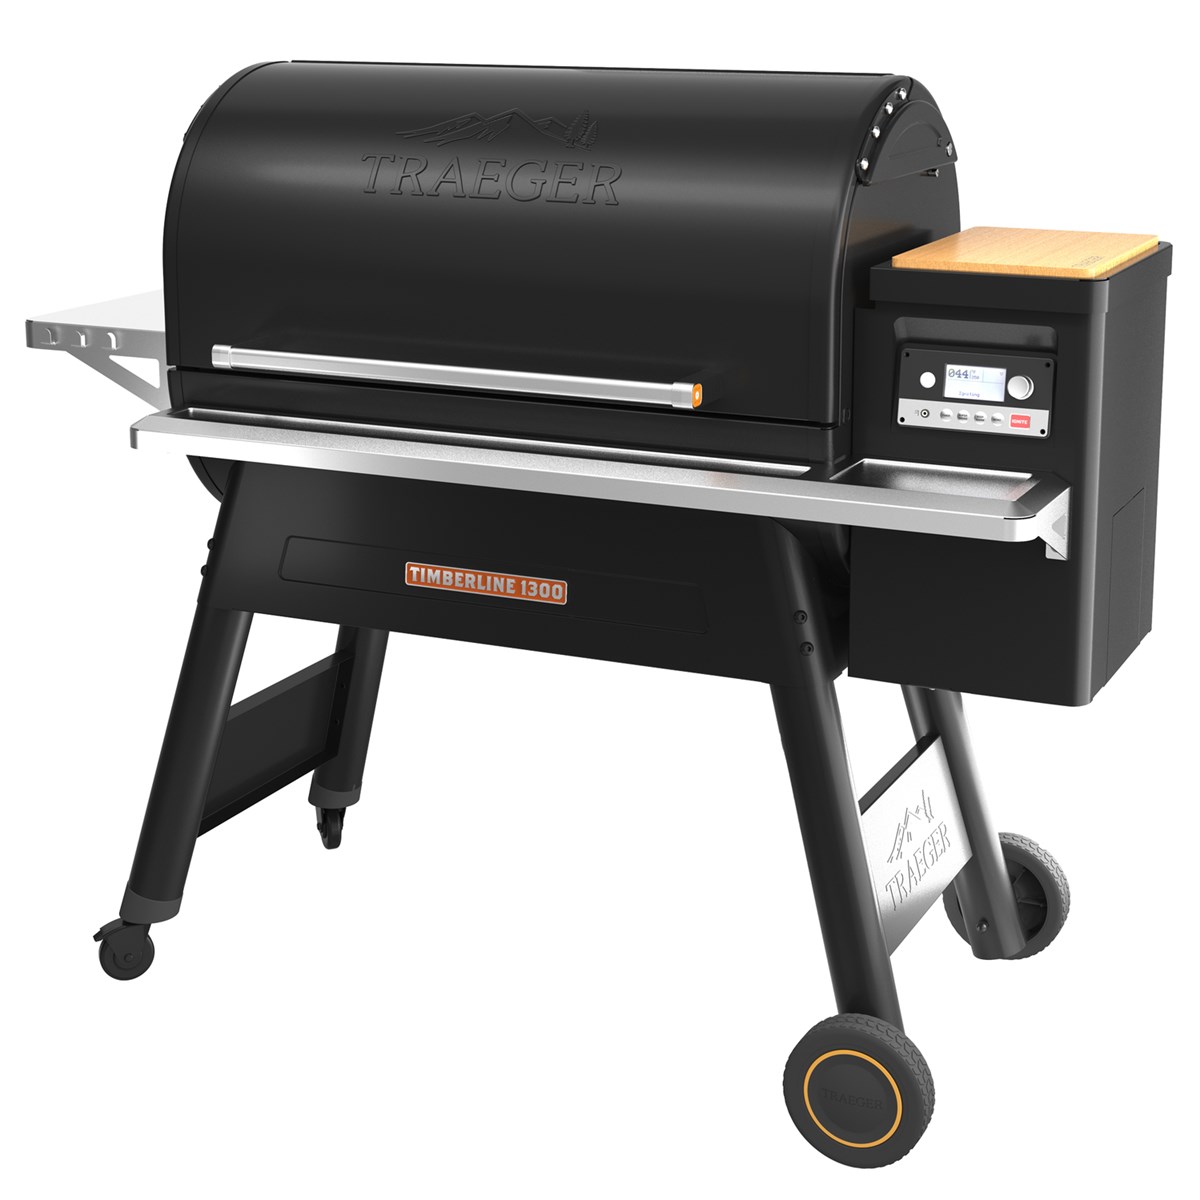 Grills and Smokers Traeger Timberline 1300 Wood Pellet WiFi Grill